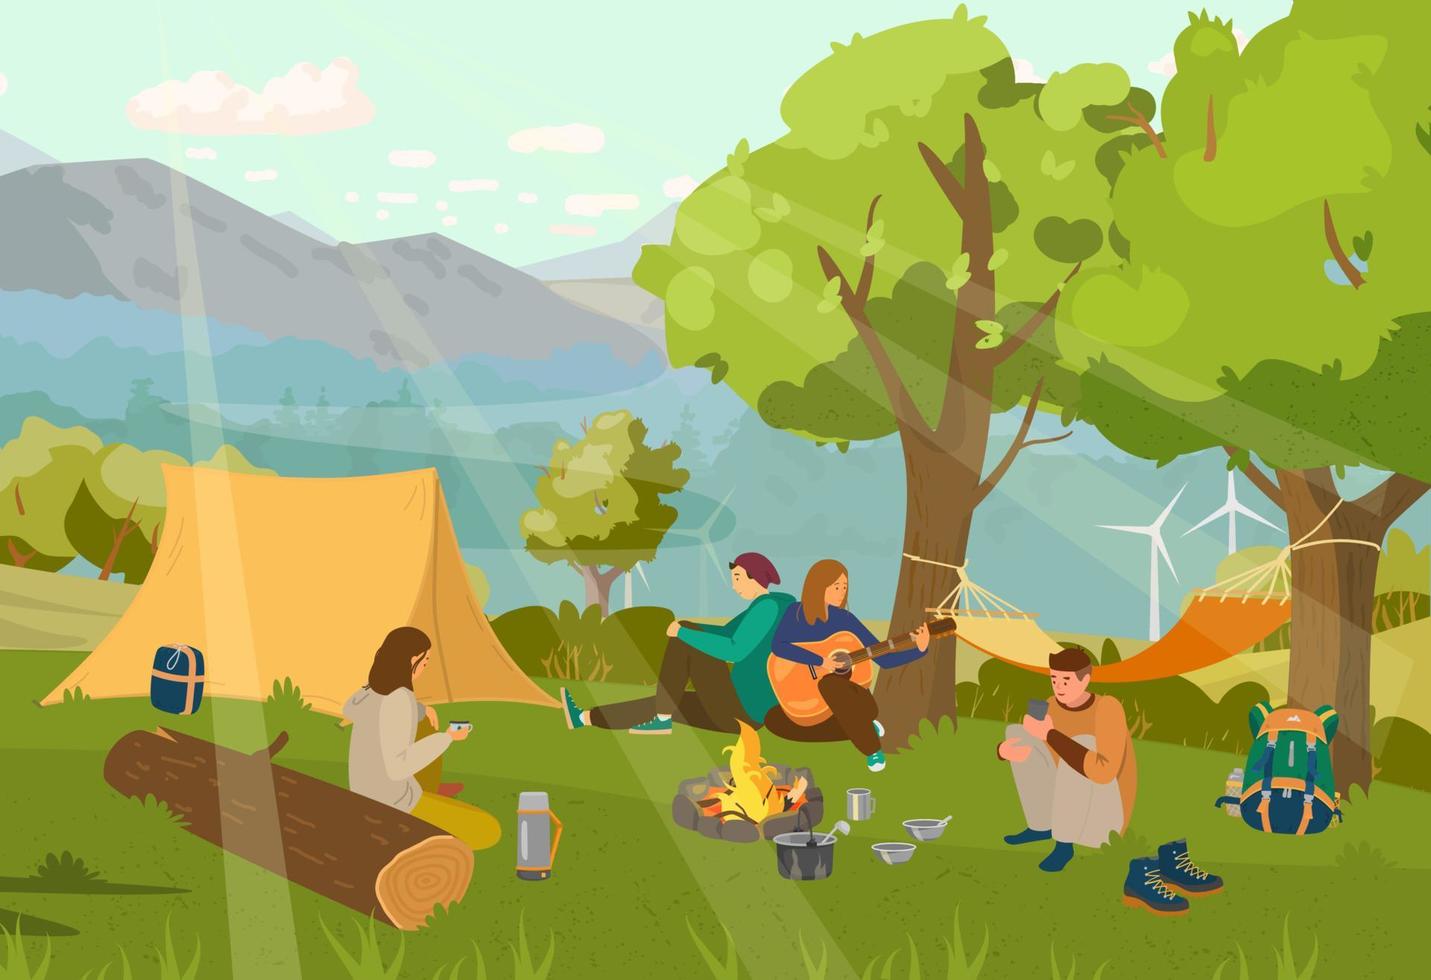 Group of friends in camp site sitting around campfire playing guitar. Mountains landscape. Hike, outdoors. Vector illustration.